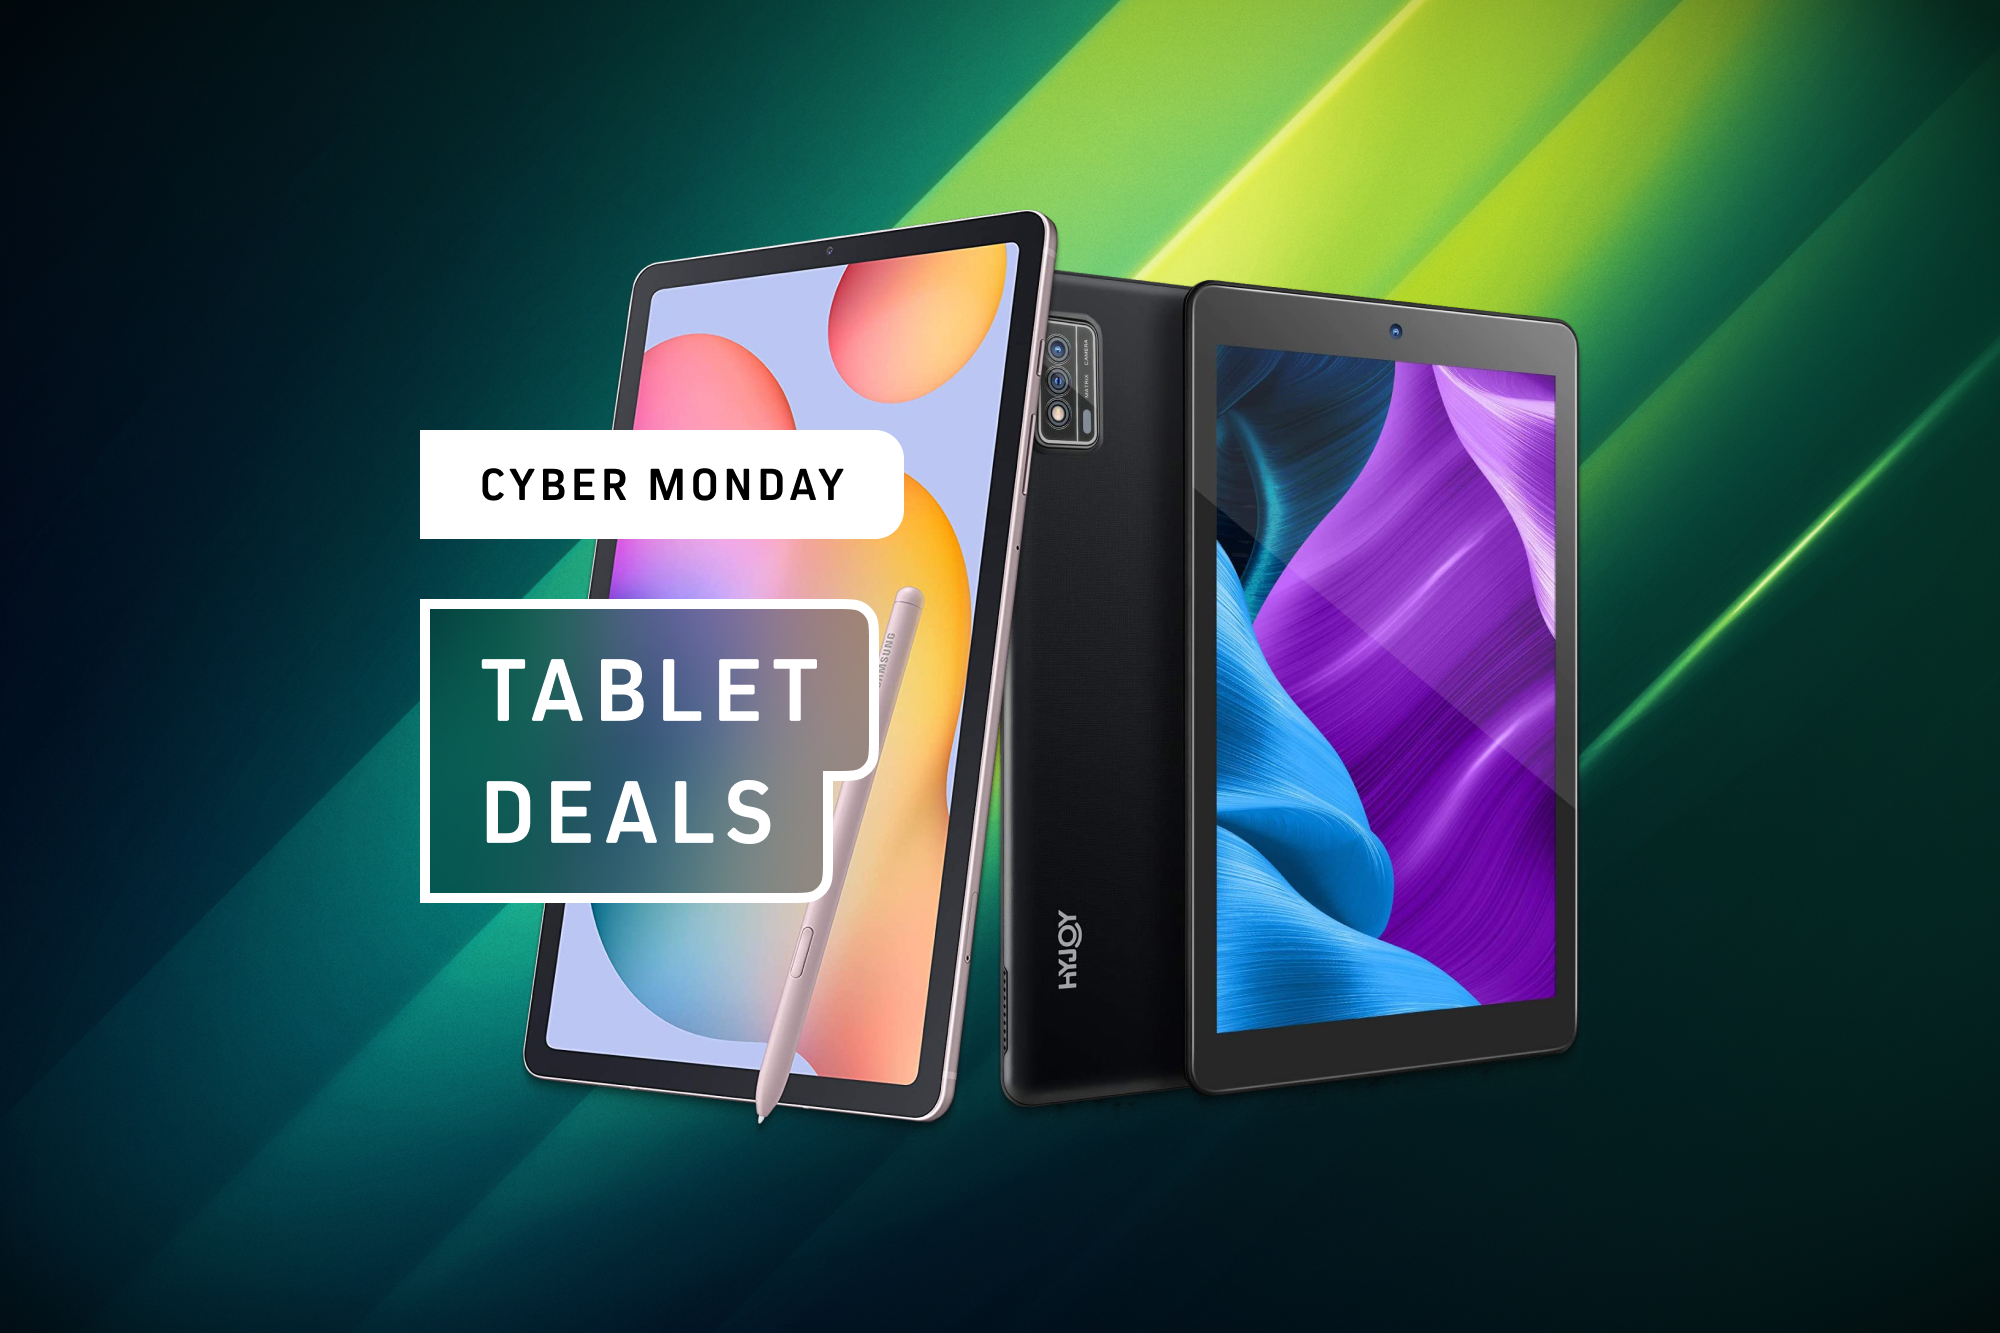 Save up to $100 on These Amazing Cyber Monday iPad Deals Before